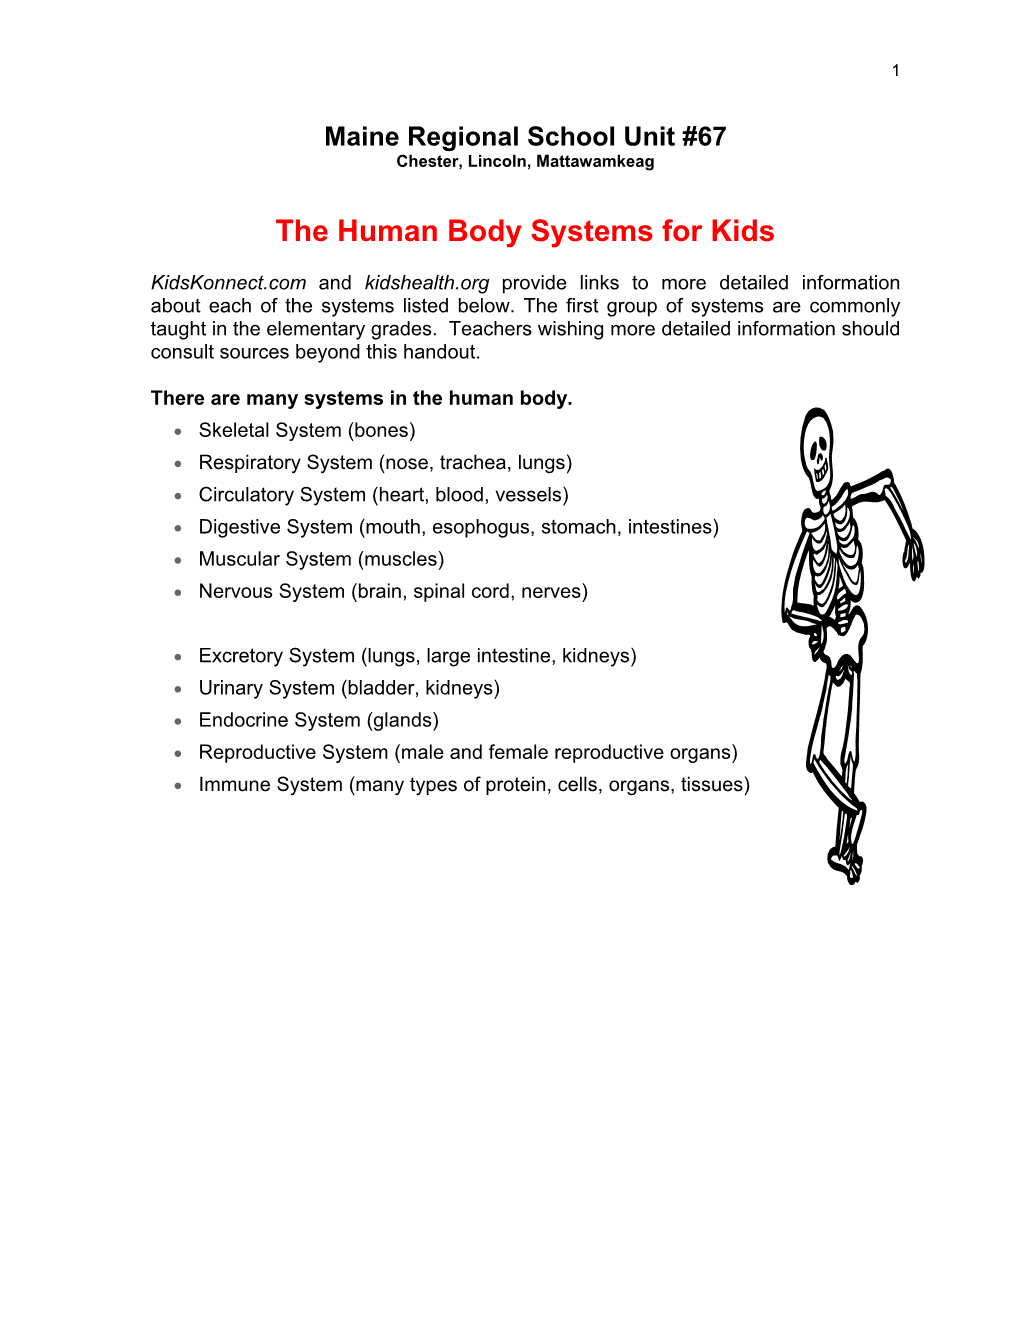 The Human Body Systems for Kids